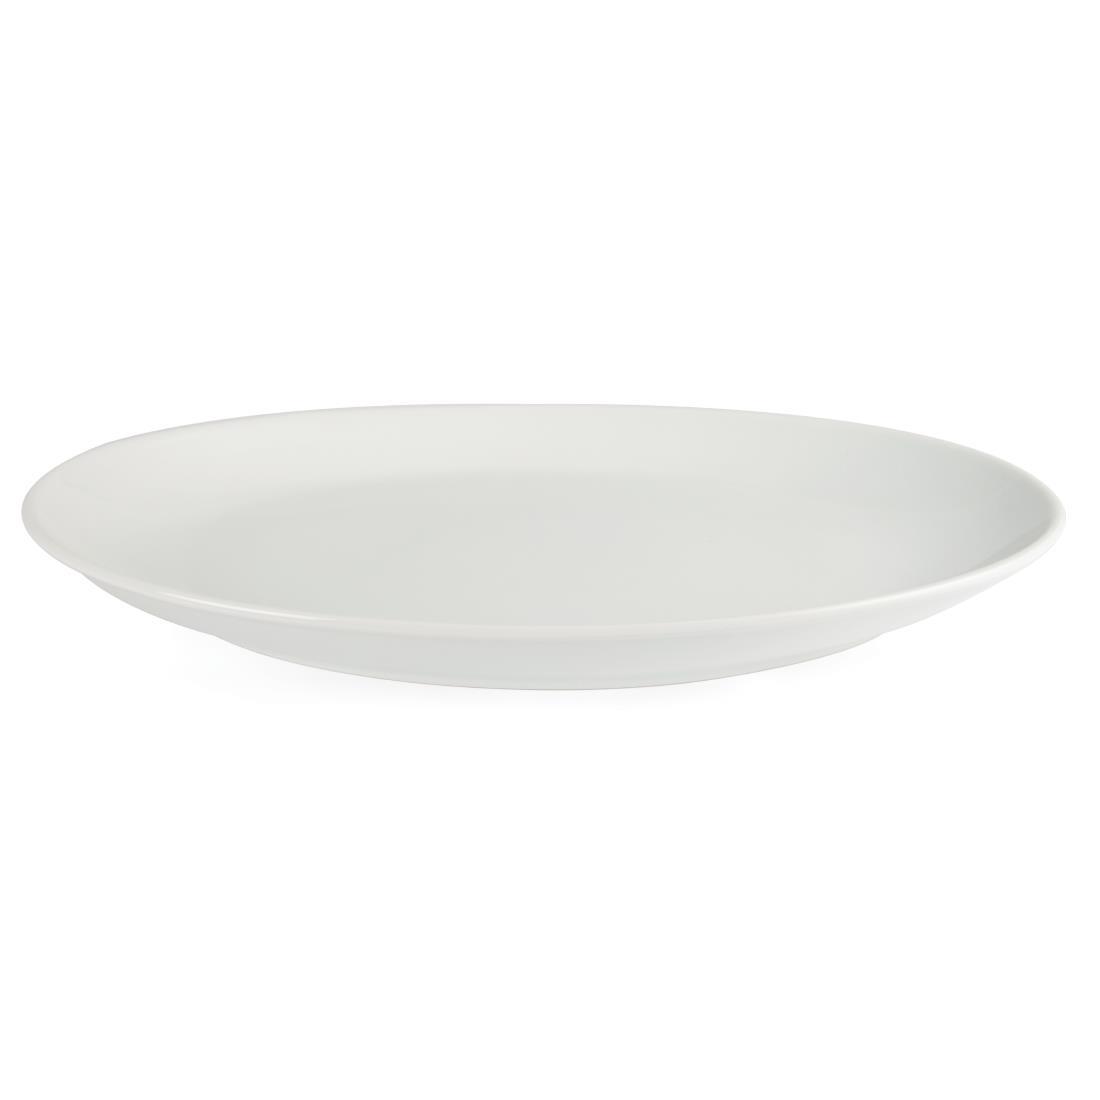 Olympia French Deep Oval Plates 500mm - CC892  - 6